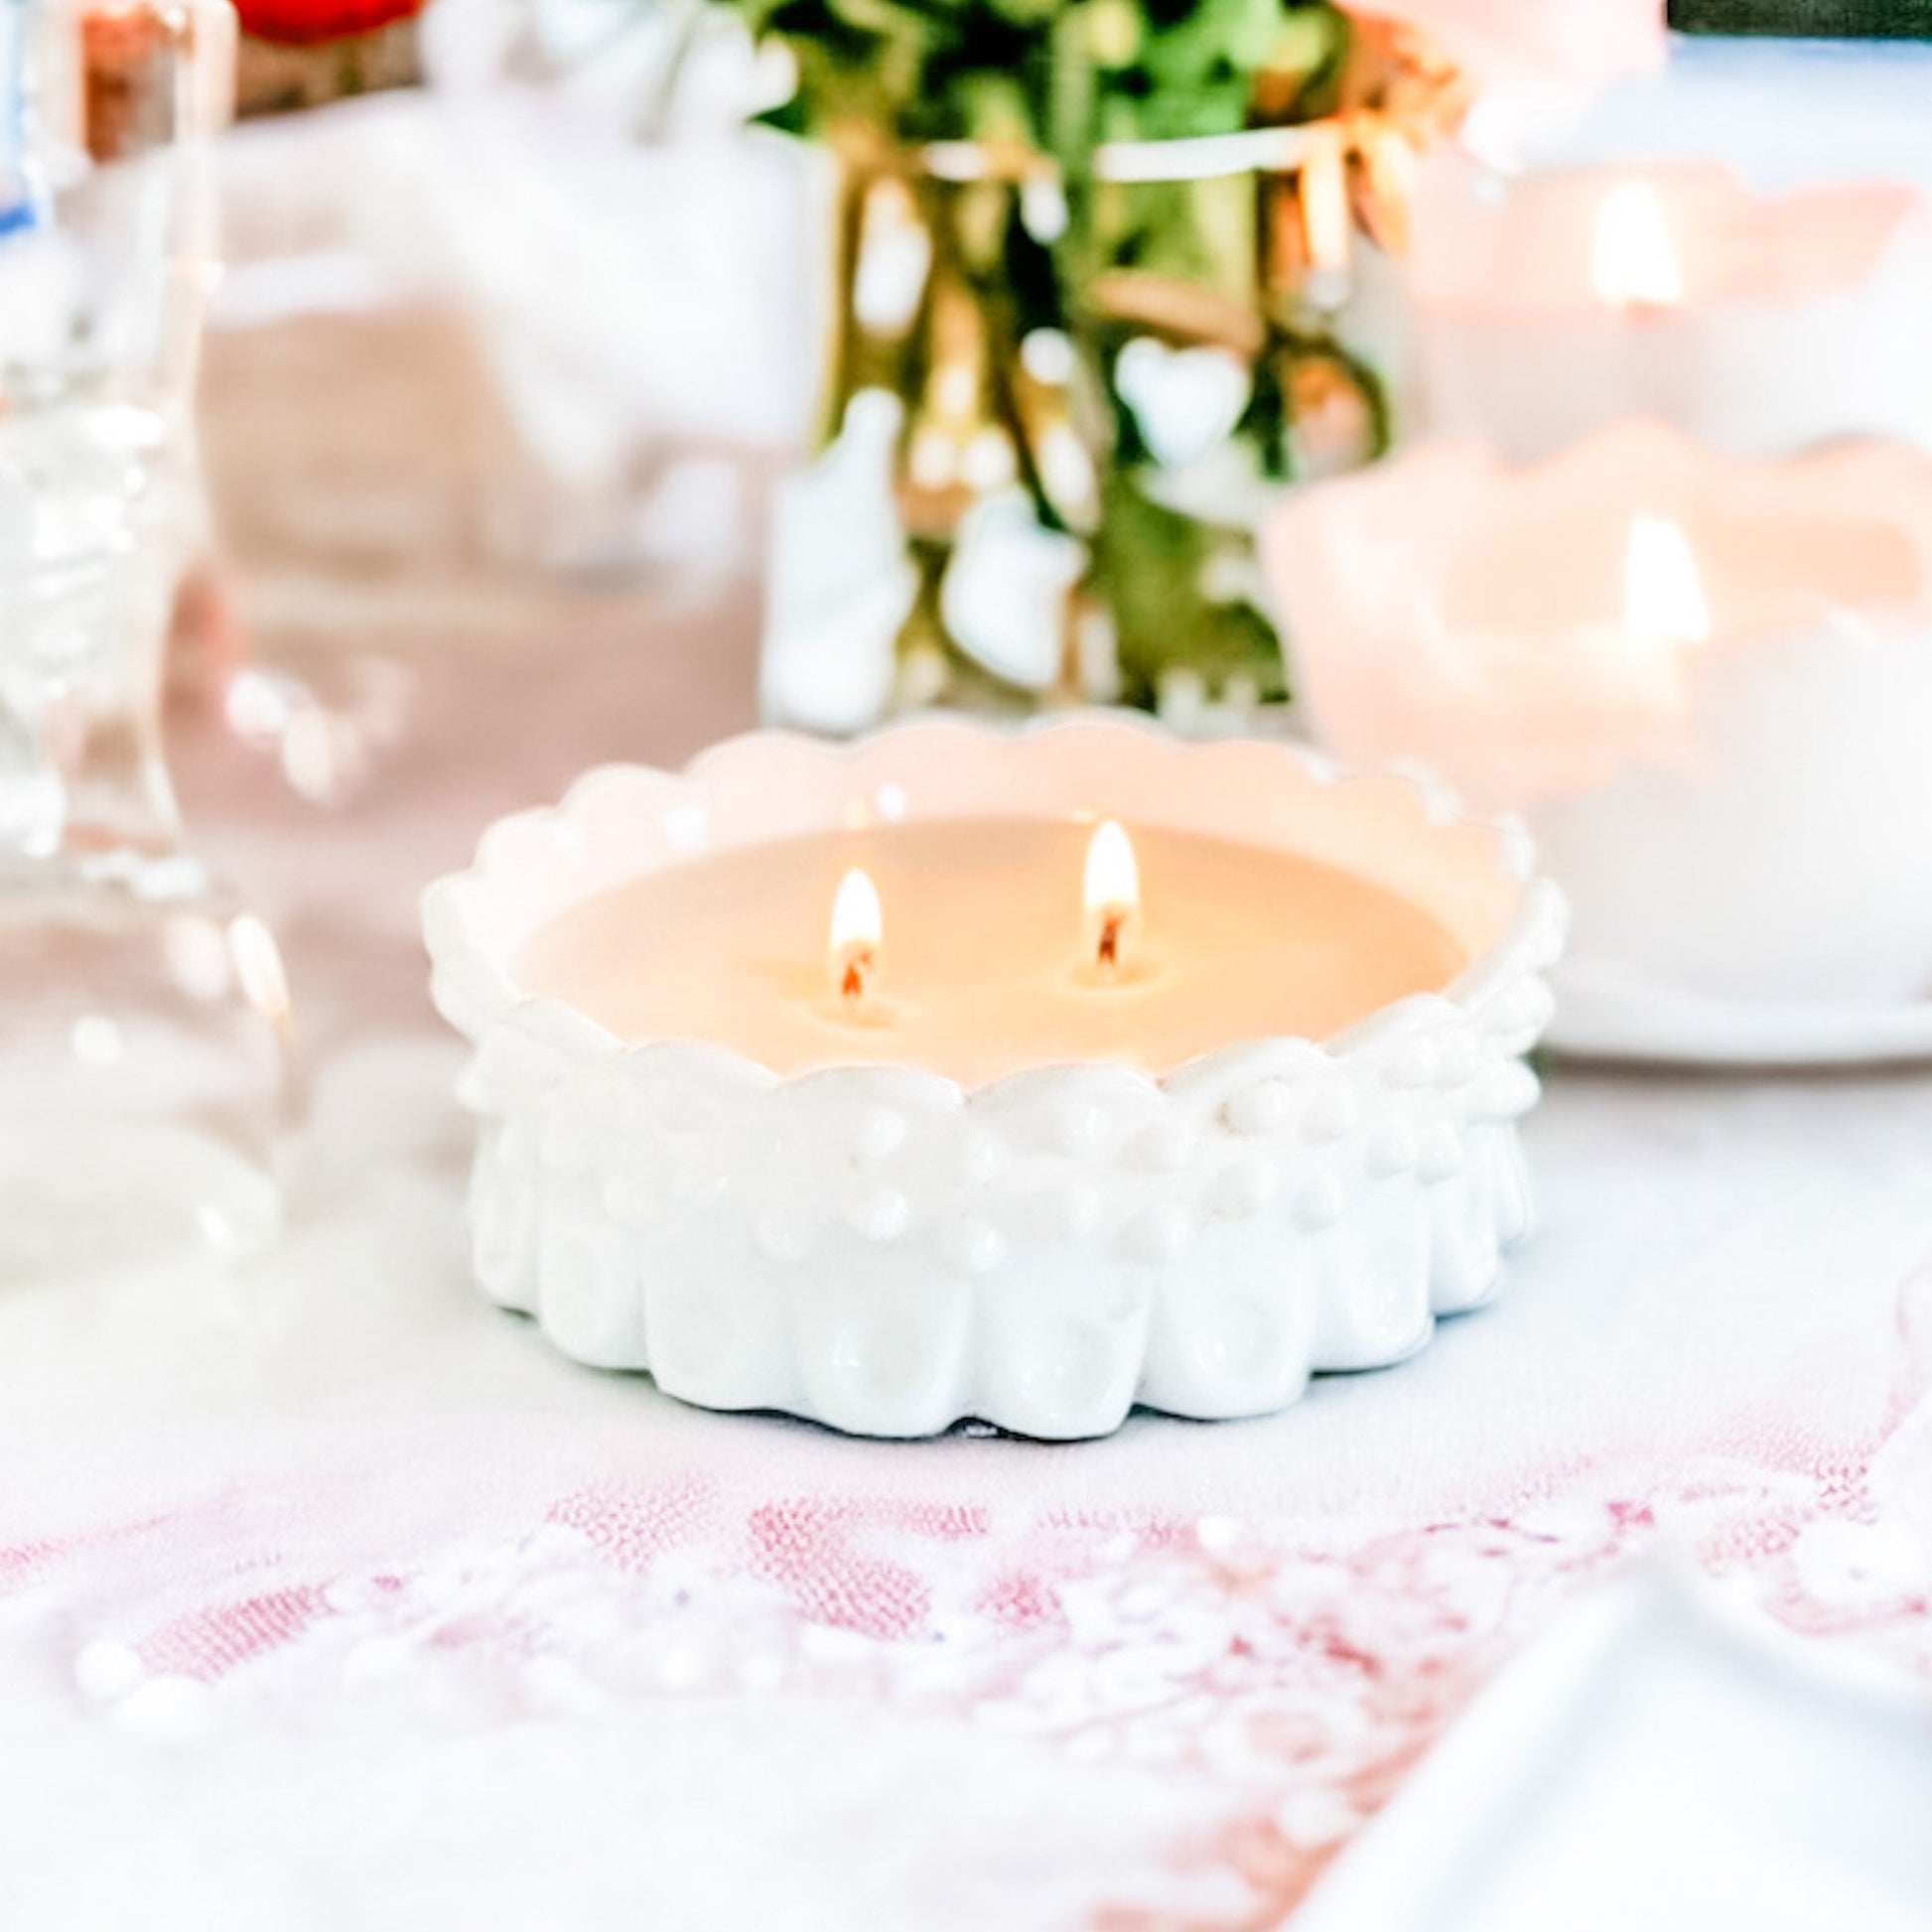 Vintage Satin Milk Glass Candle | Cypress & Bayberry Scent